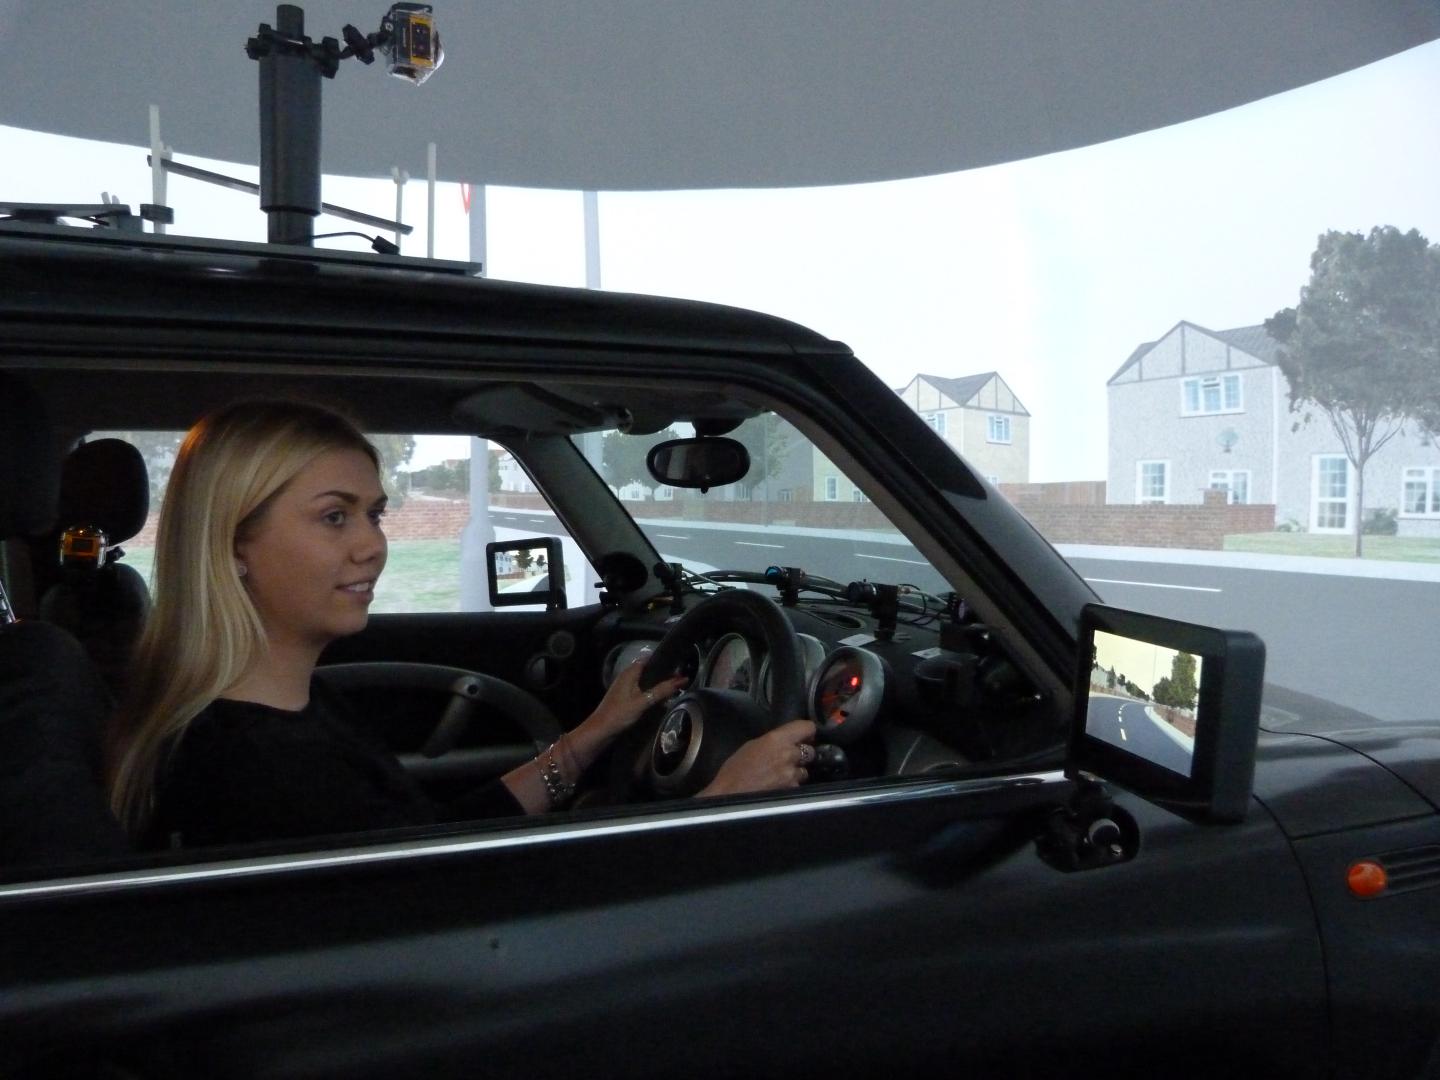 Researcher in the Driving Simulator